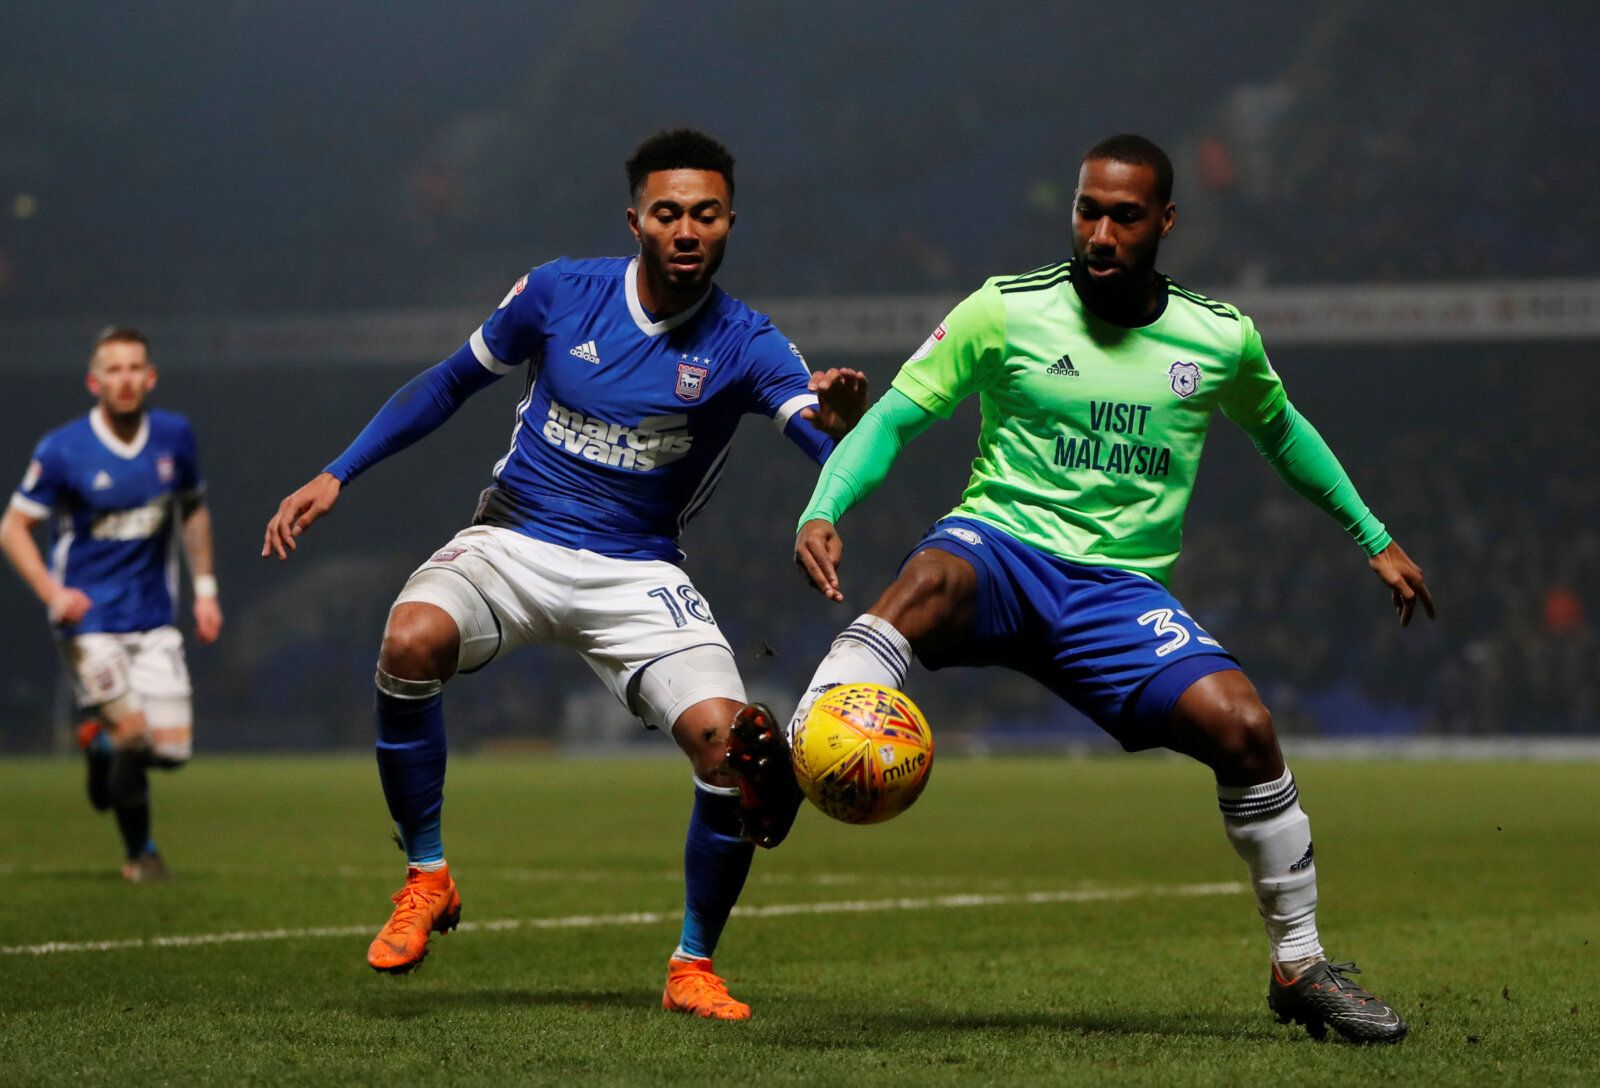 Soccer Football - Championship - Ipswich Town vs Cardiff City - Portman Road, Ipswich, Britain - February 21, 2018   Cardiff City's Junior Hoilett in action with Ipswich Town's Grant Ward      Action Images/Paul Childs    EDITORIAL USE ONLY. No use with unauthorized audio, video, data, fixture lists, club/league logos or "live" services. Online in-match use limited to 75 images, no video emulation. No use in betting, games or single club/league/player publications. Please contact your account re